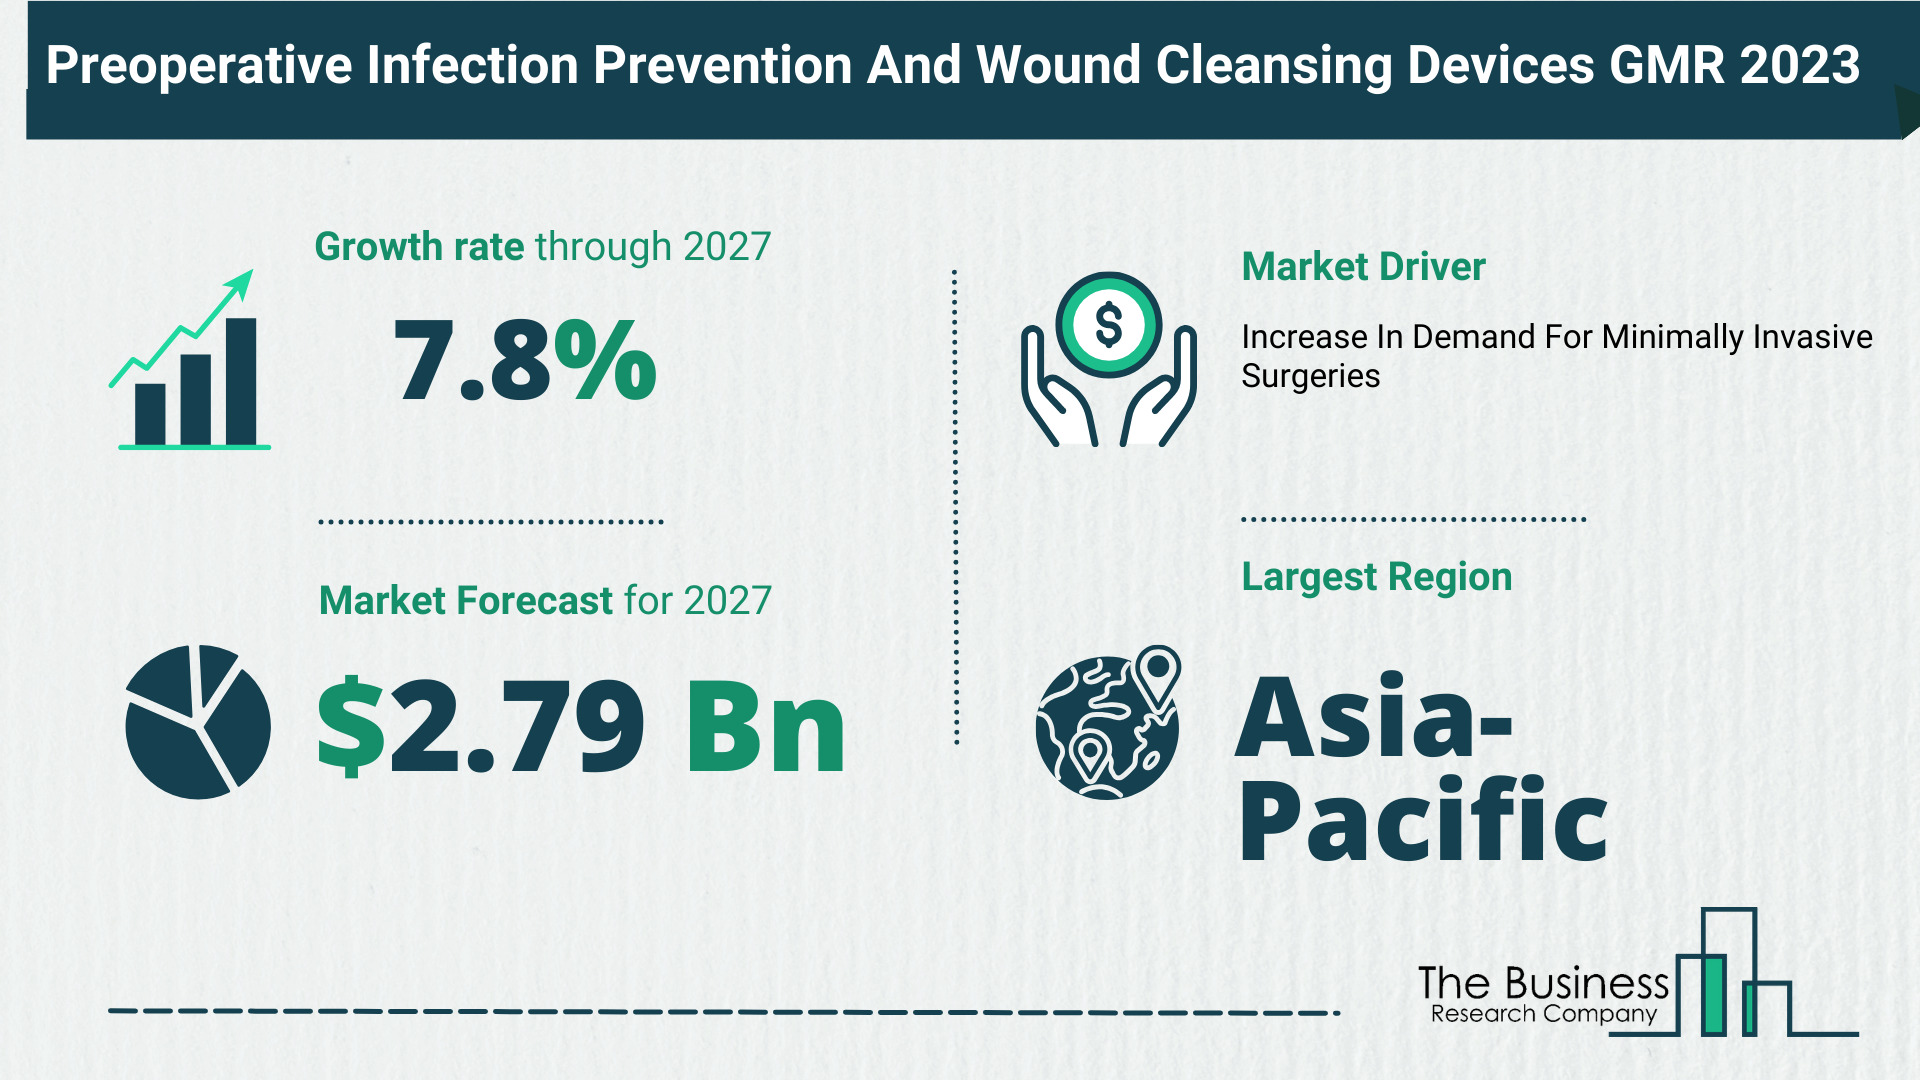 Key Trends And Drivers In The Preoperative Infection Prevention And Wound Cleansing Devices Market 2023